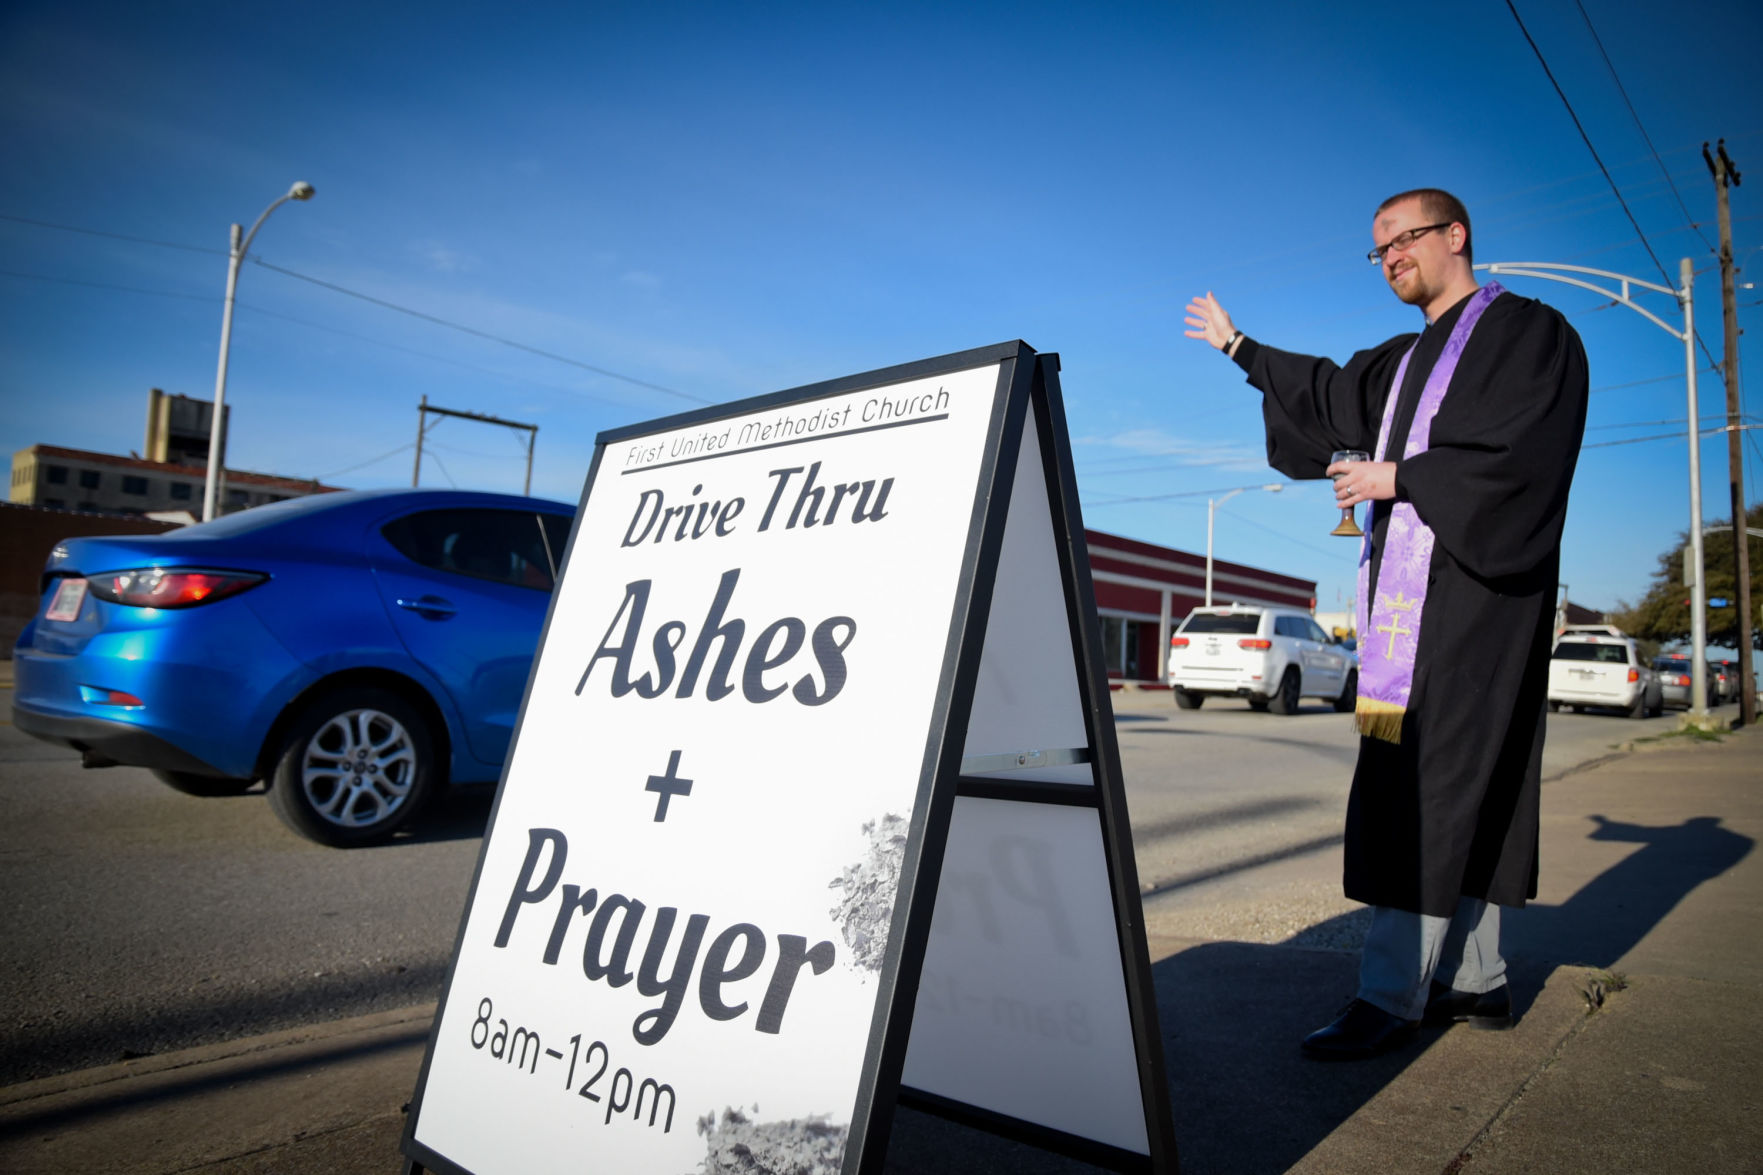 ash wednesday 2019 imposition ashes